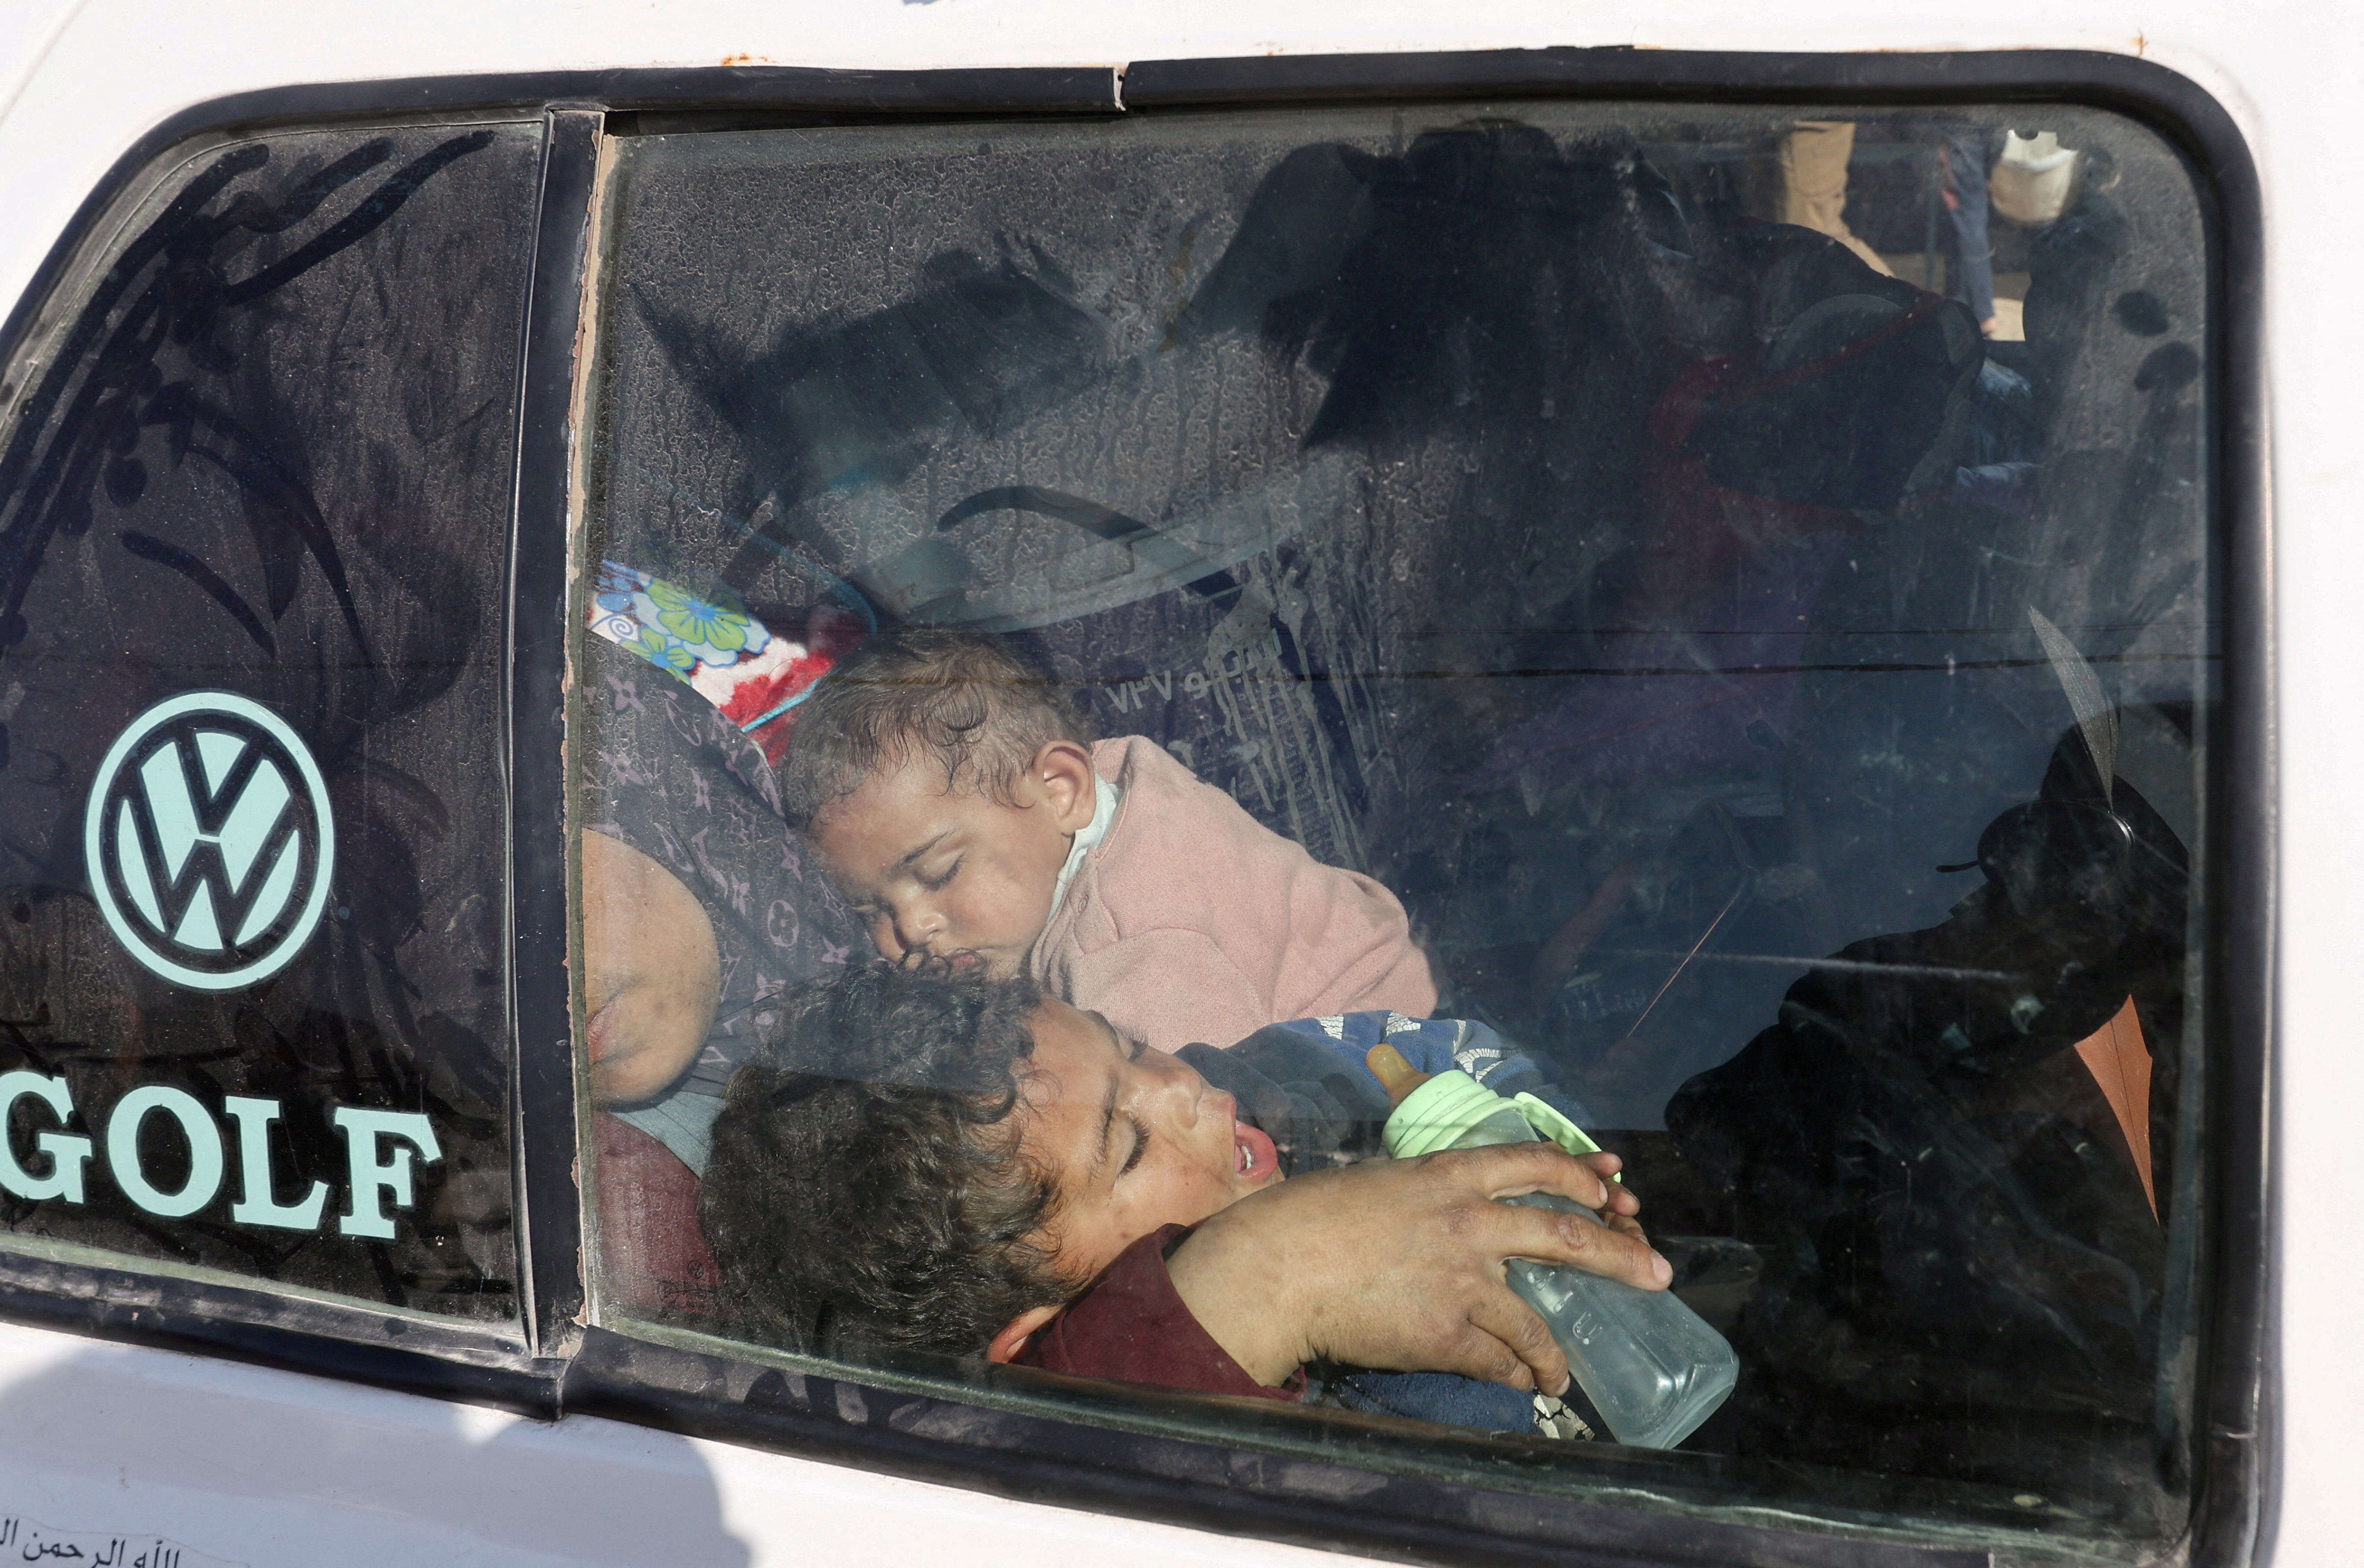 Palestinians fleeing Khan Younis, due to the Israeli ground operation, arrive in Rafah